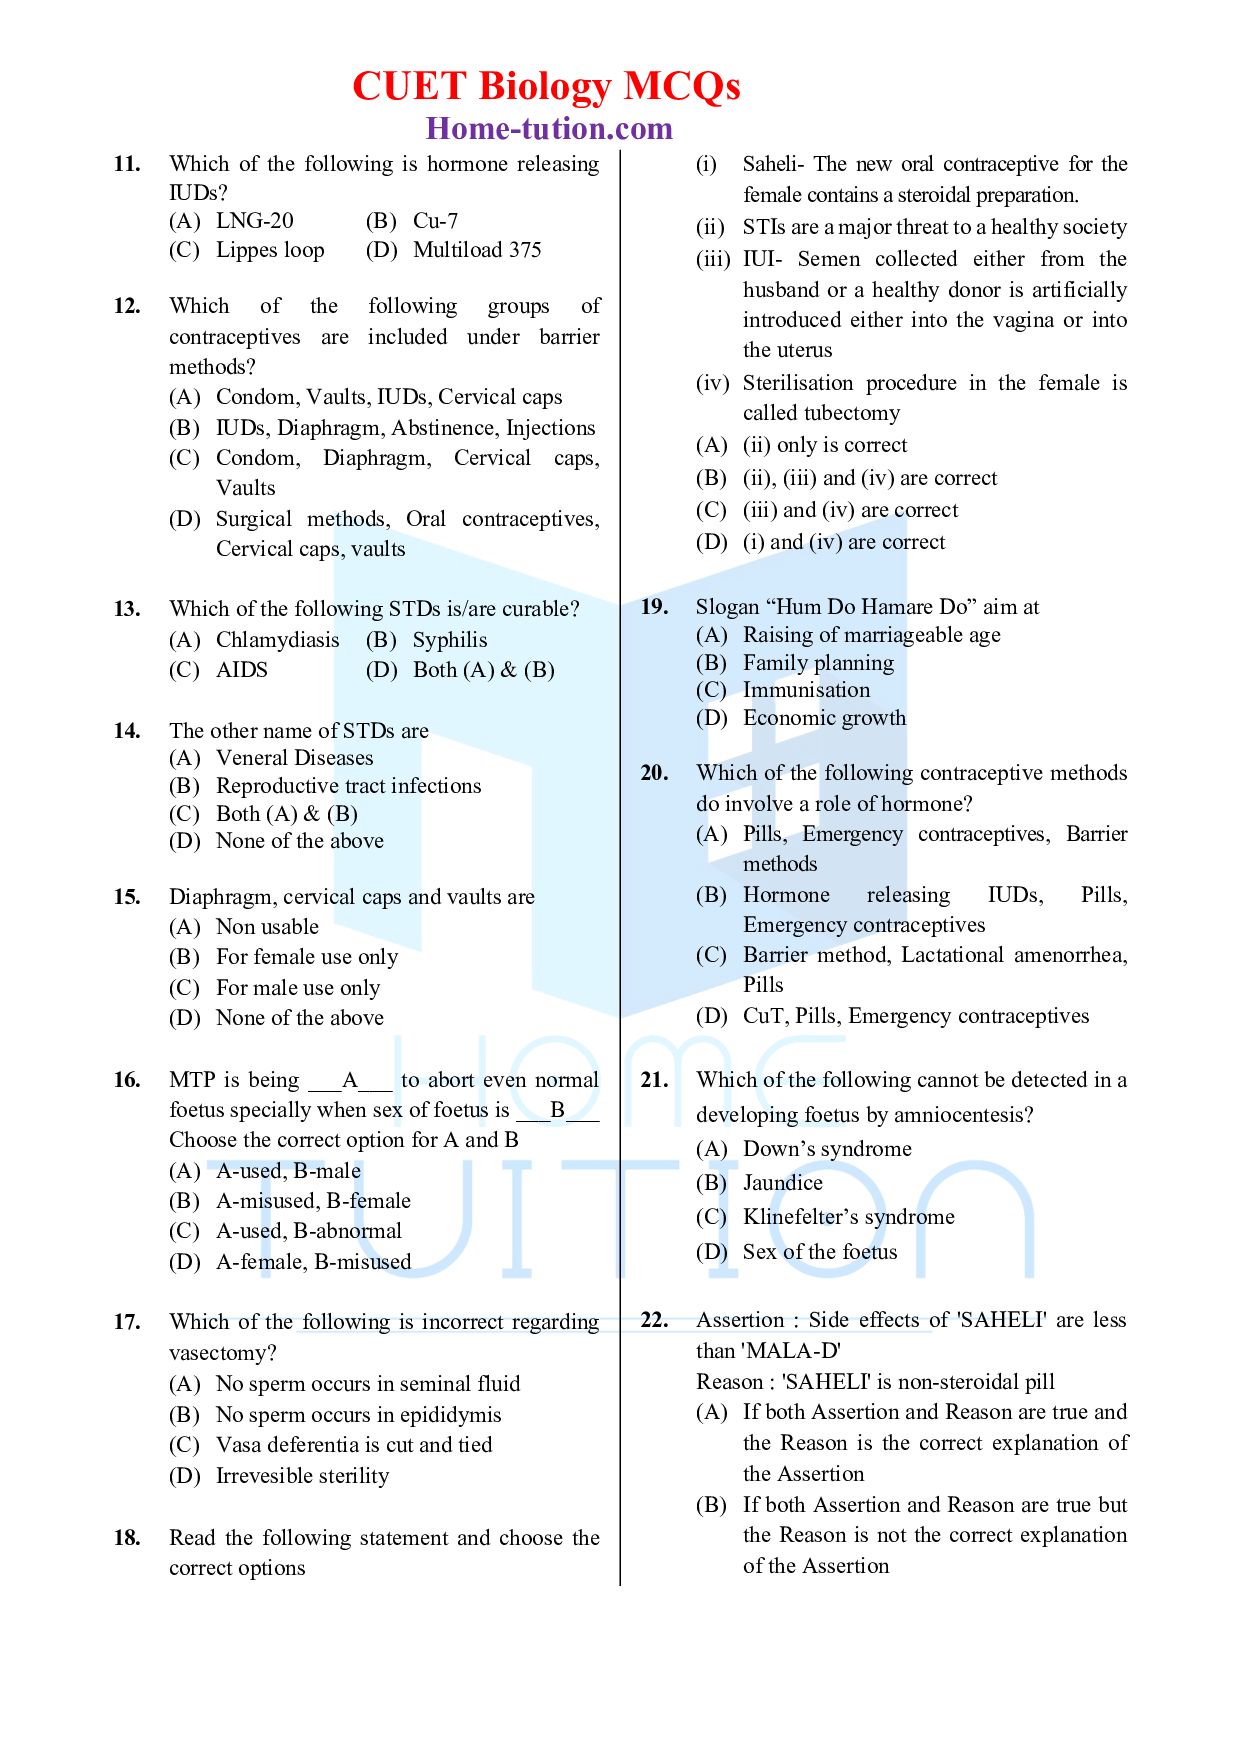 Biology MCQ Questions for CUET Chapter 4 Reproductive Health